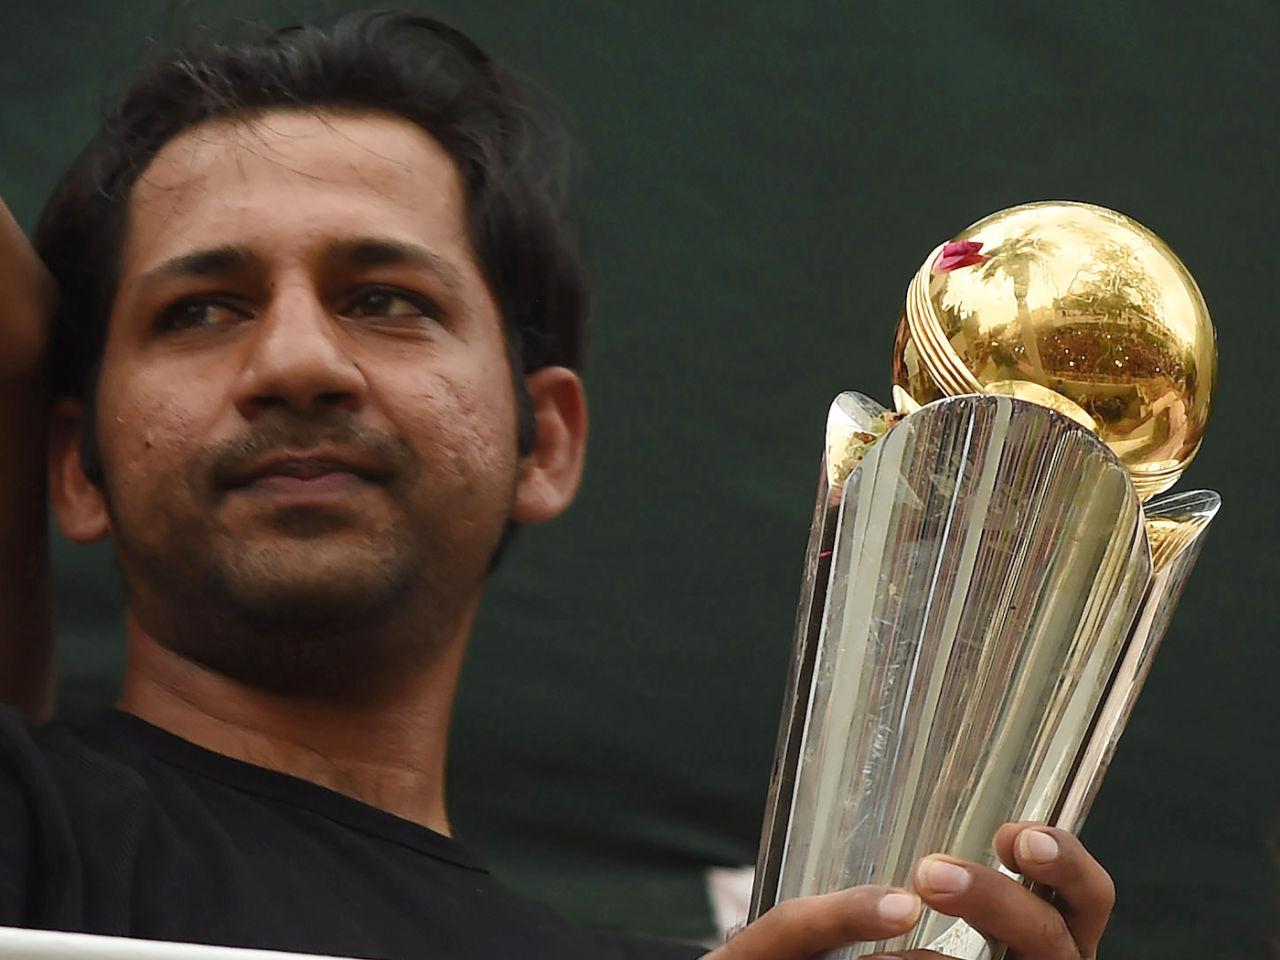 Sarfraz Ahmed with the Champions Trophy after the Pakistan team's arrival home, Karachi, June 20, 2017
